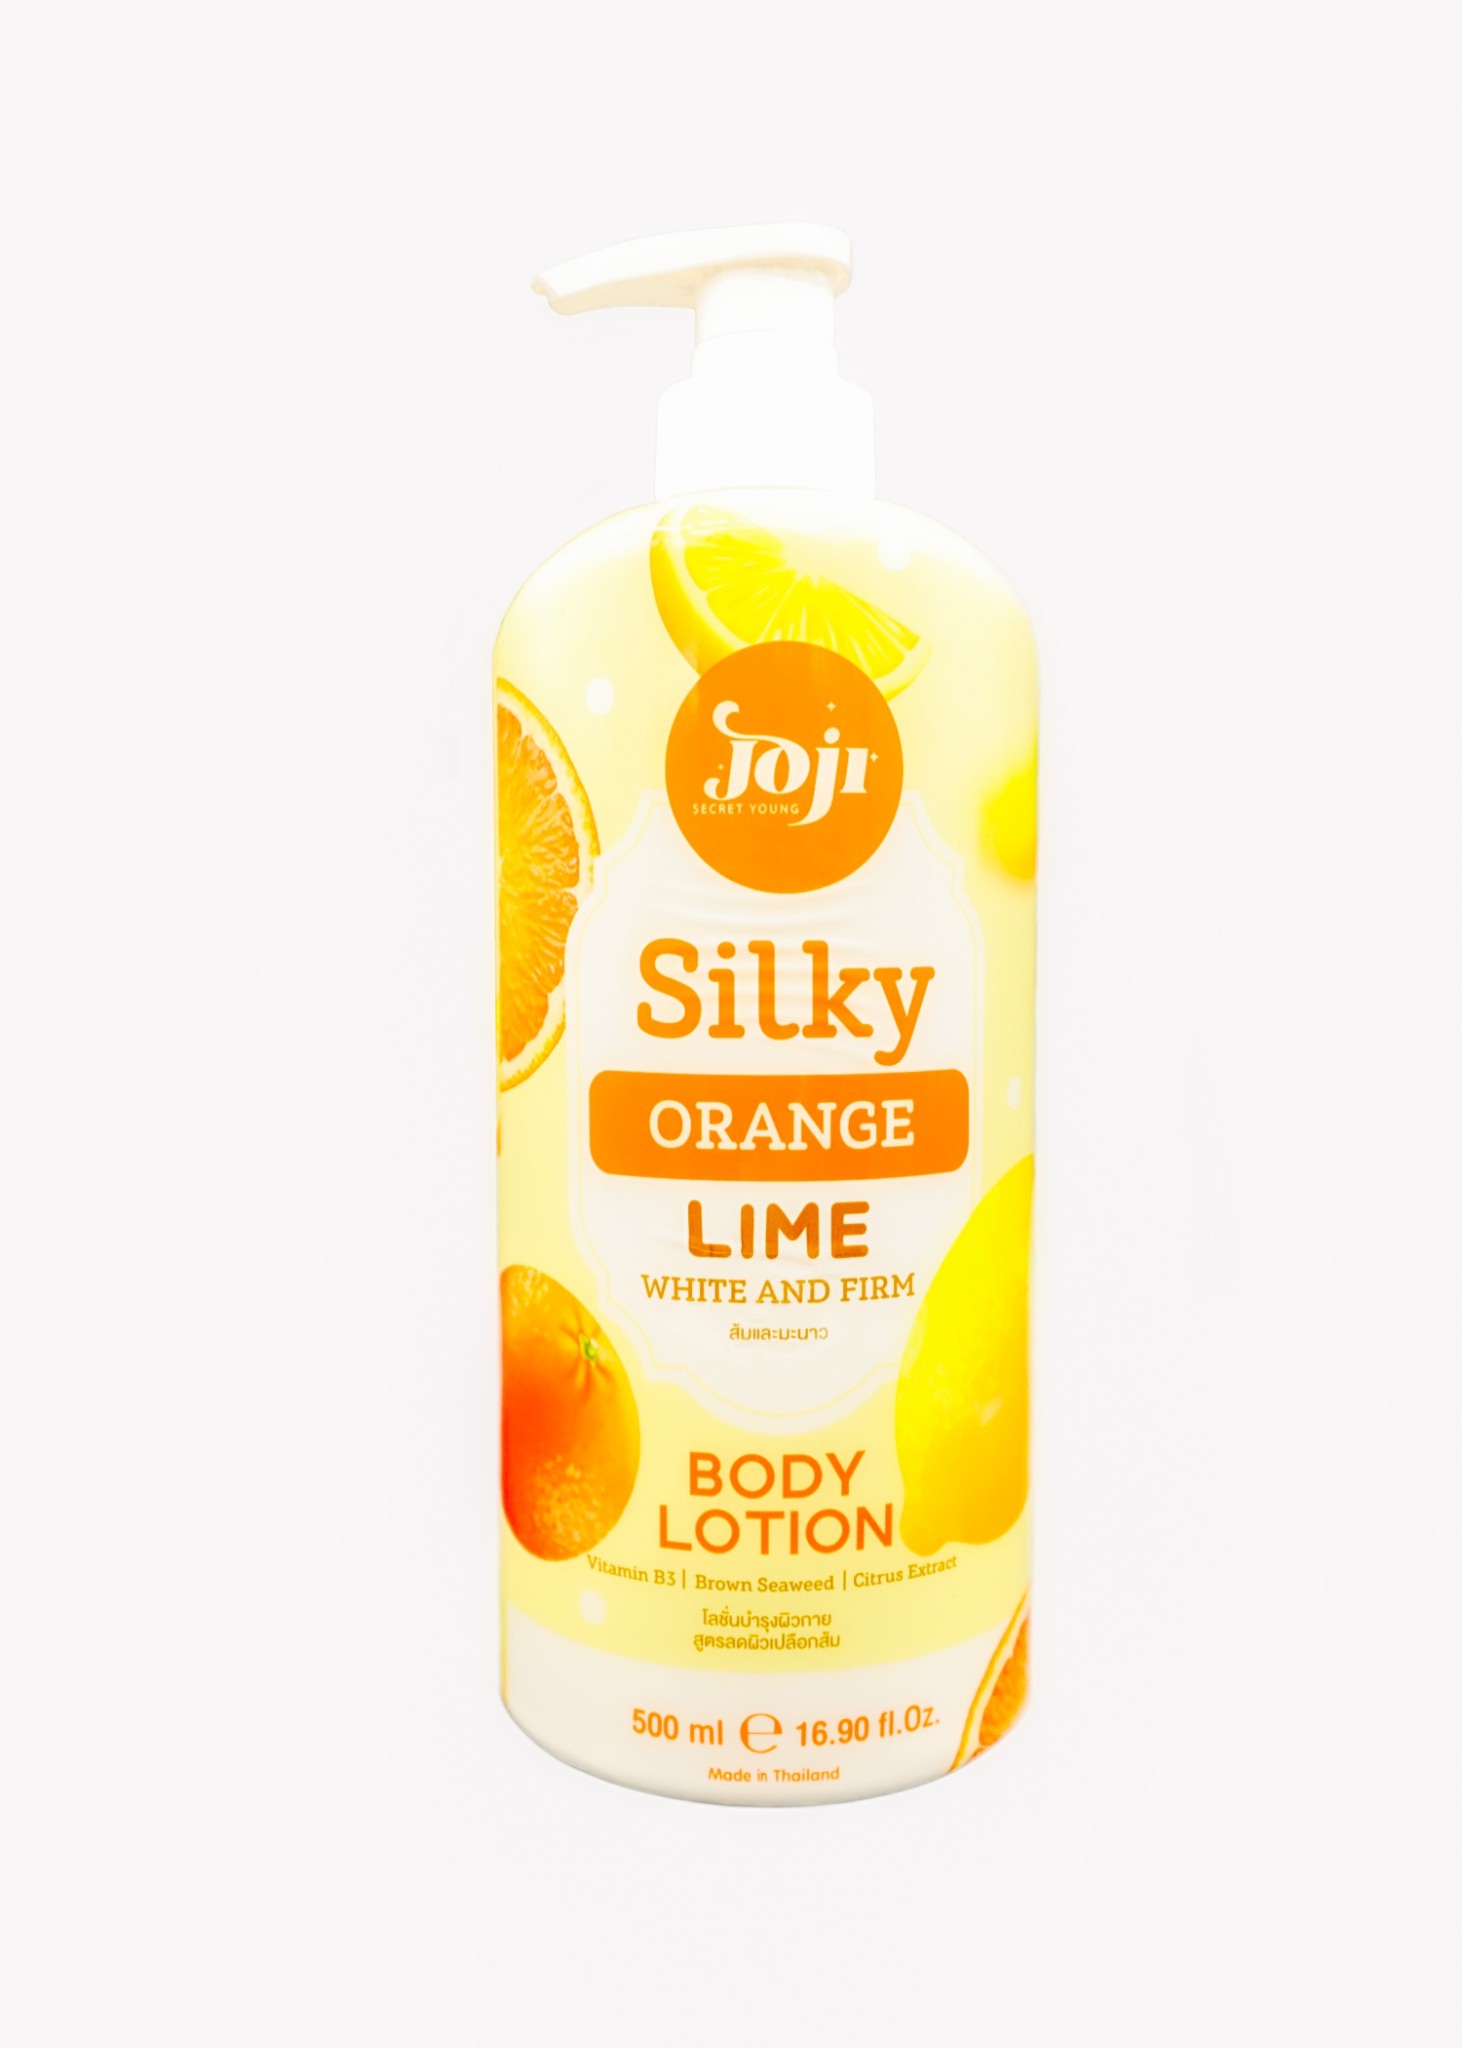 JOJI SECRET YOUNG Silky Orange Lime White and Firm Body Lotion 500g